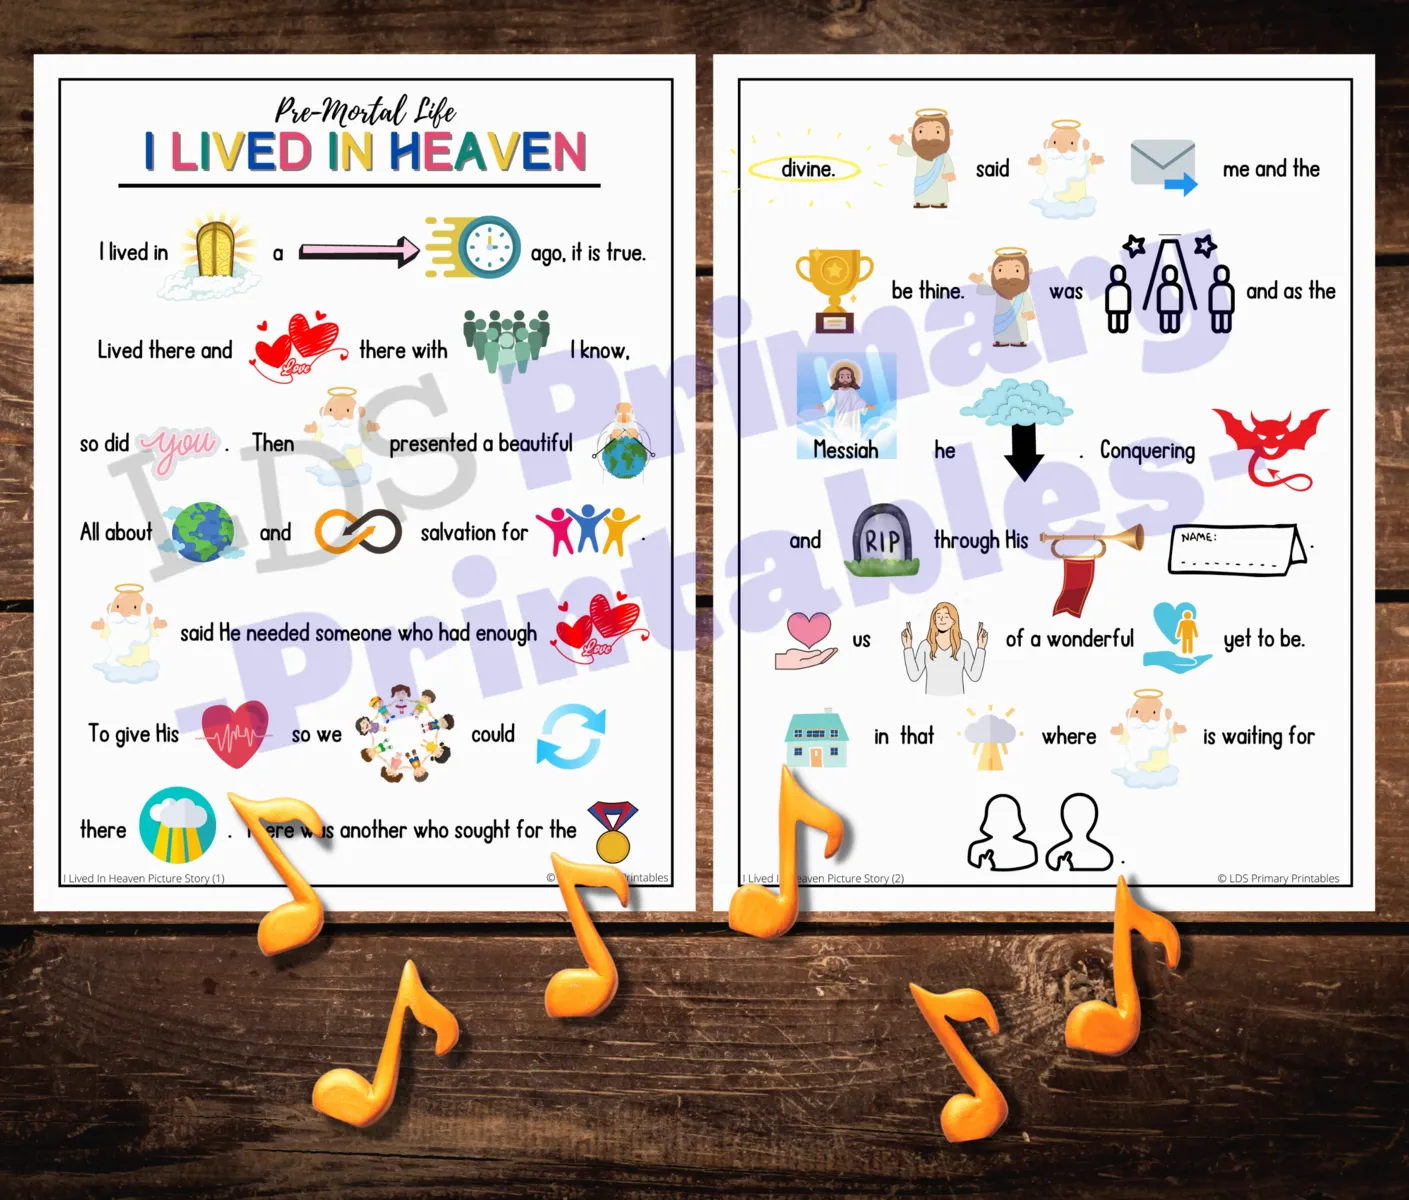 I lived in heaven LDS Primary song picture story song visuals printable